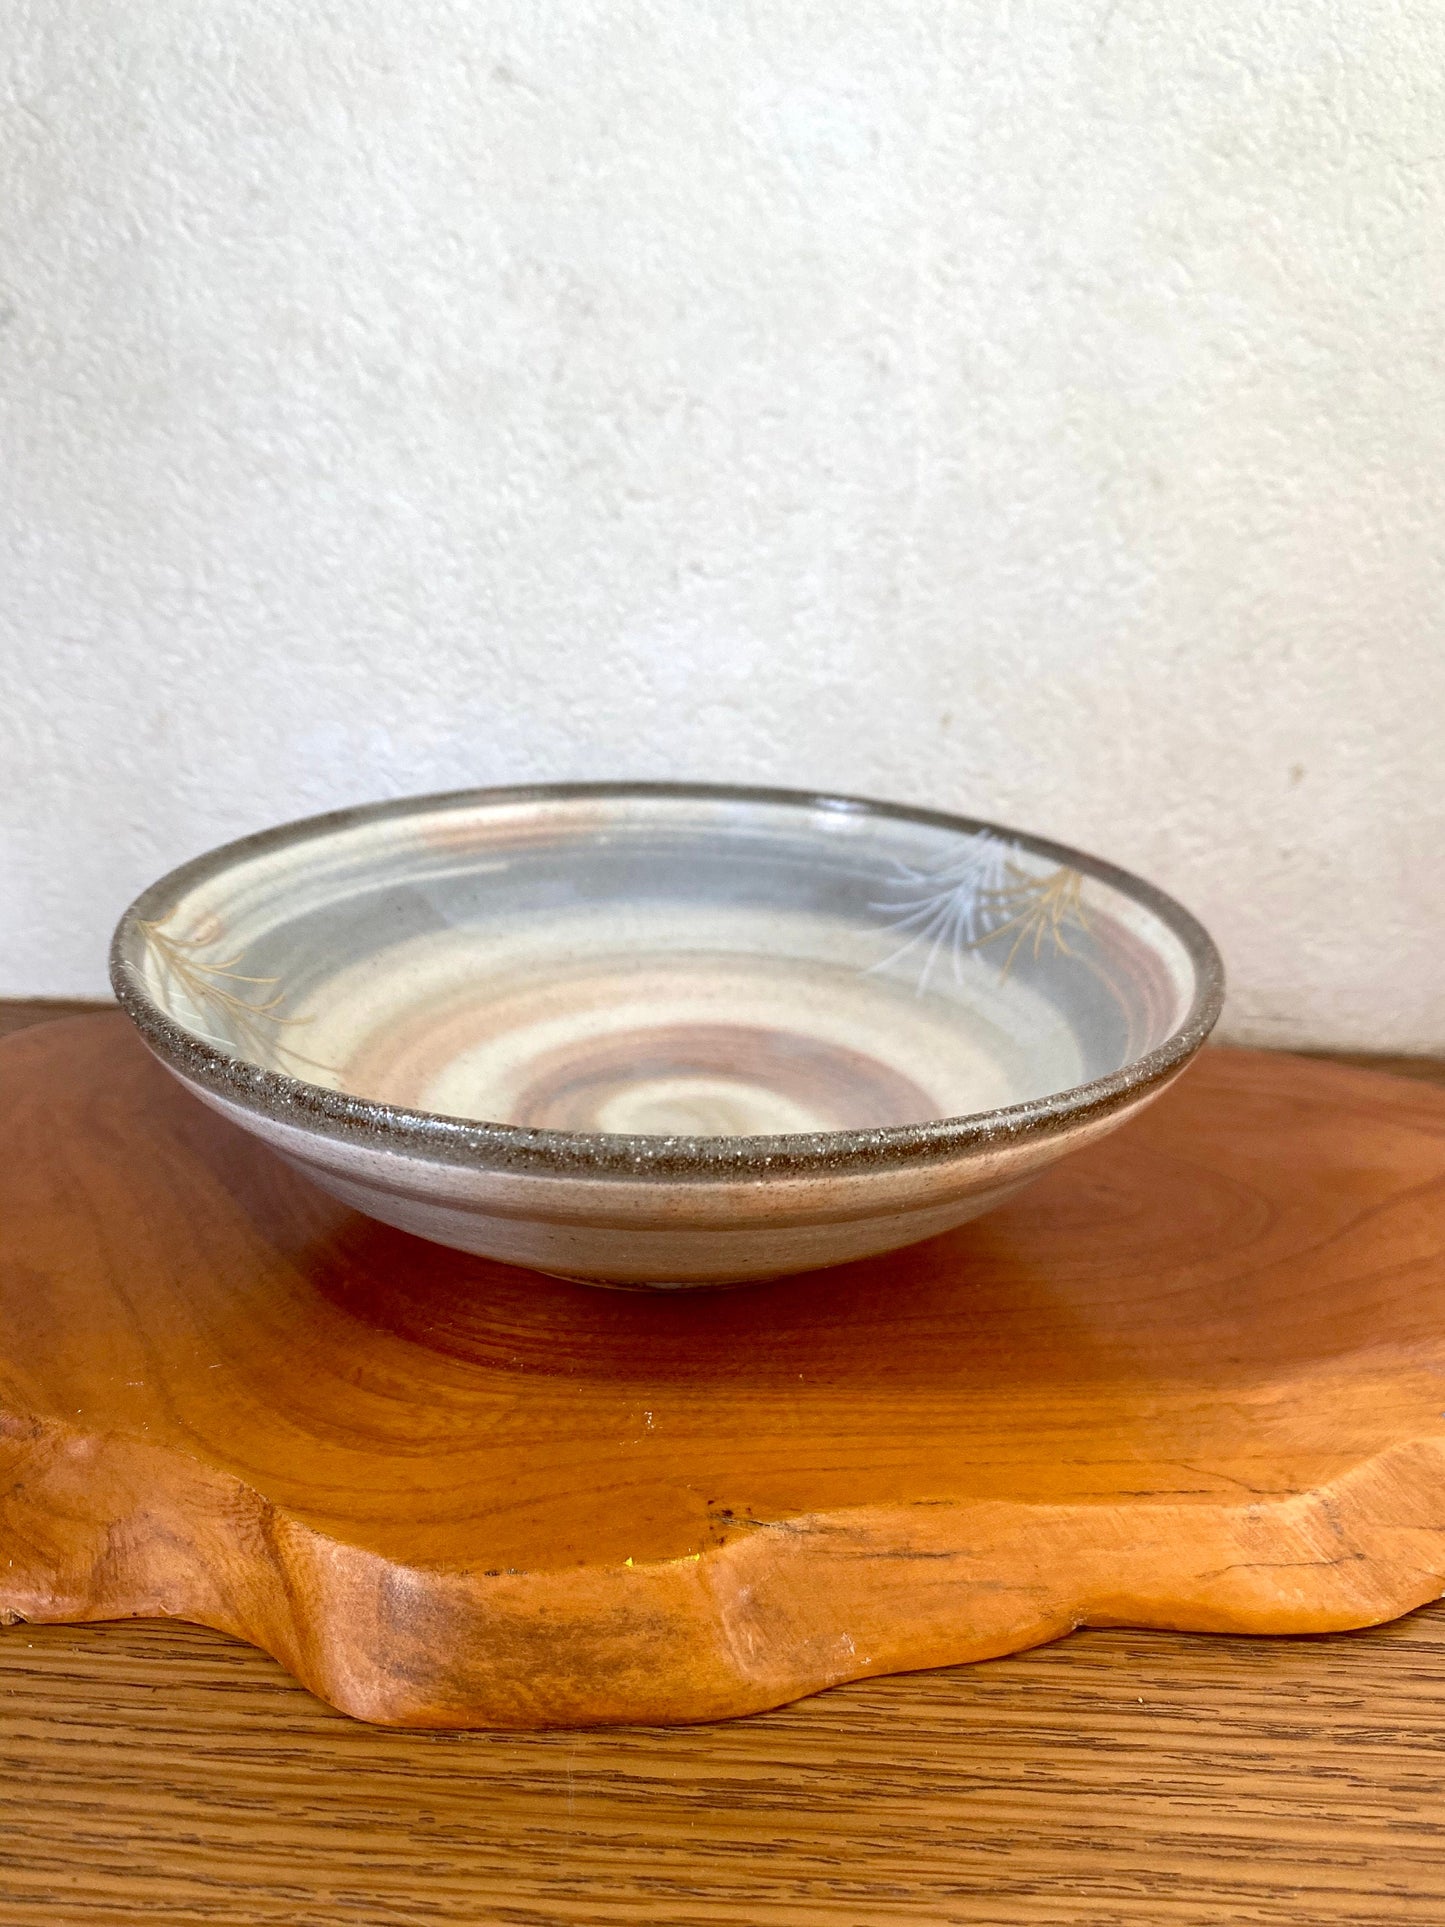 Japanese Porcelain Bowl, Tachikichi たち吉 橘吉 brand. 6.3" diameter 1.75" height.  It is good saucer for, small to medium Kokedama